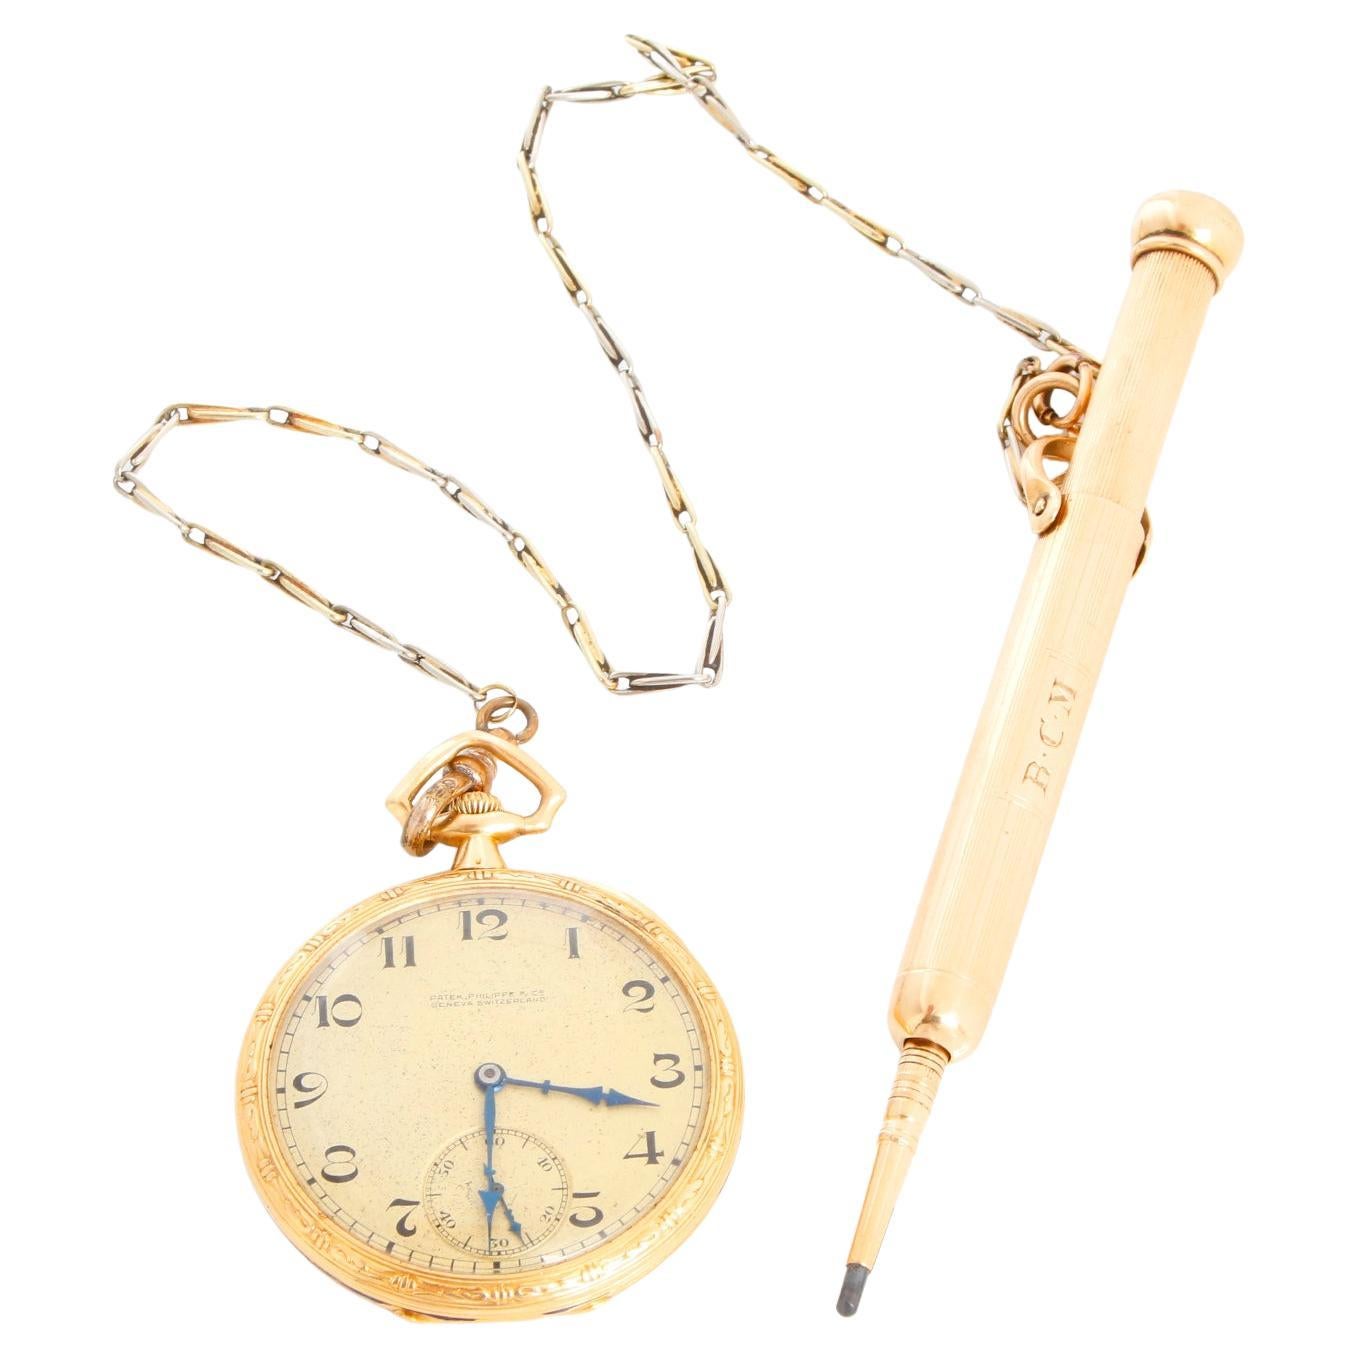 Antique Patek Phillipe Gold Pocket Watch with Wearable Leather Strap